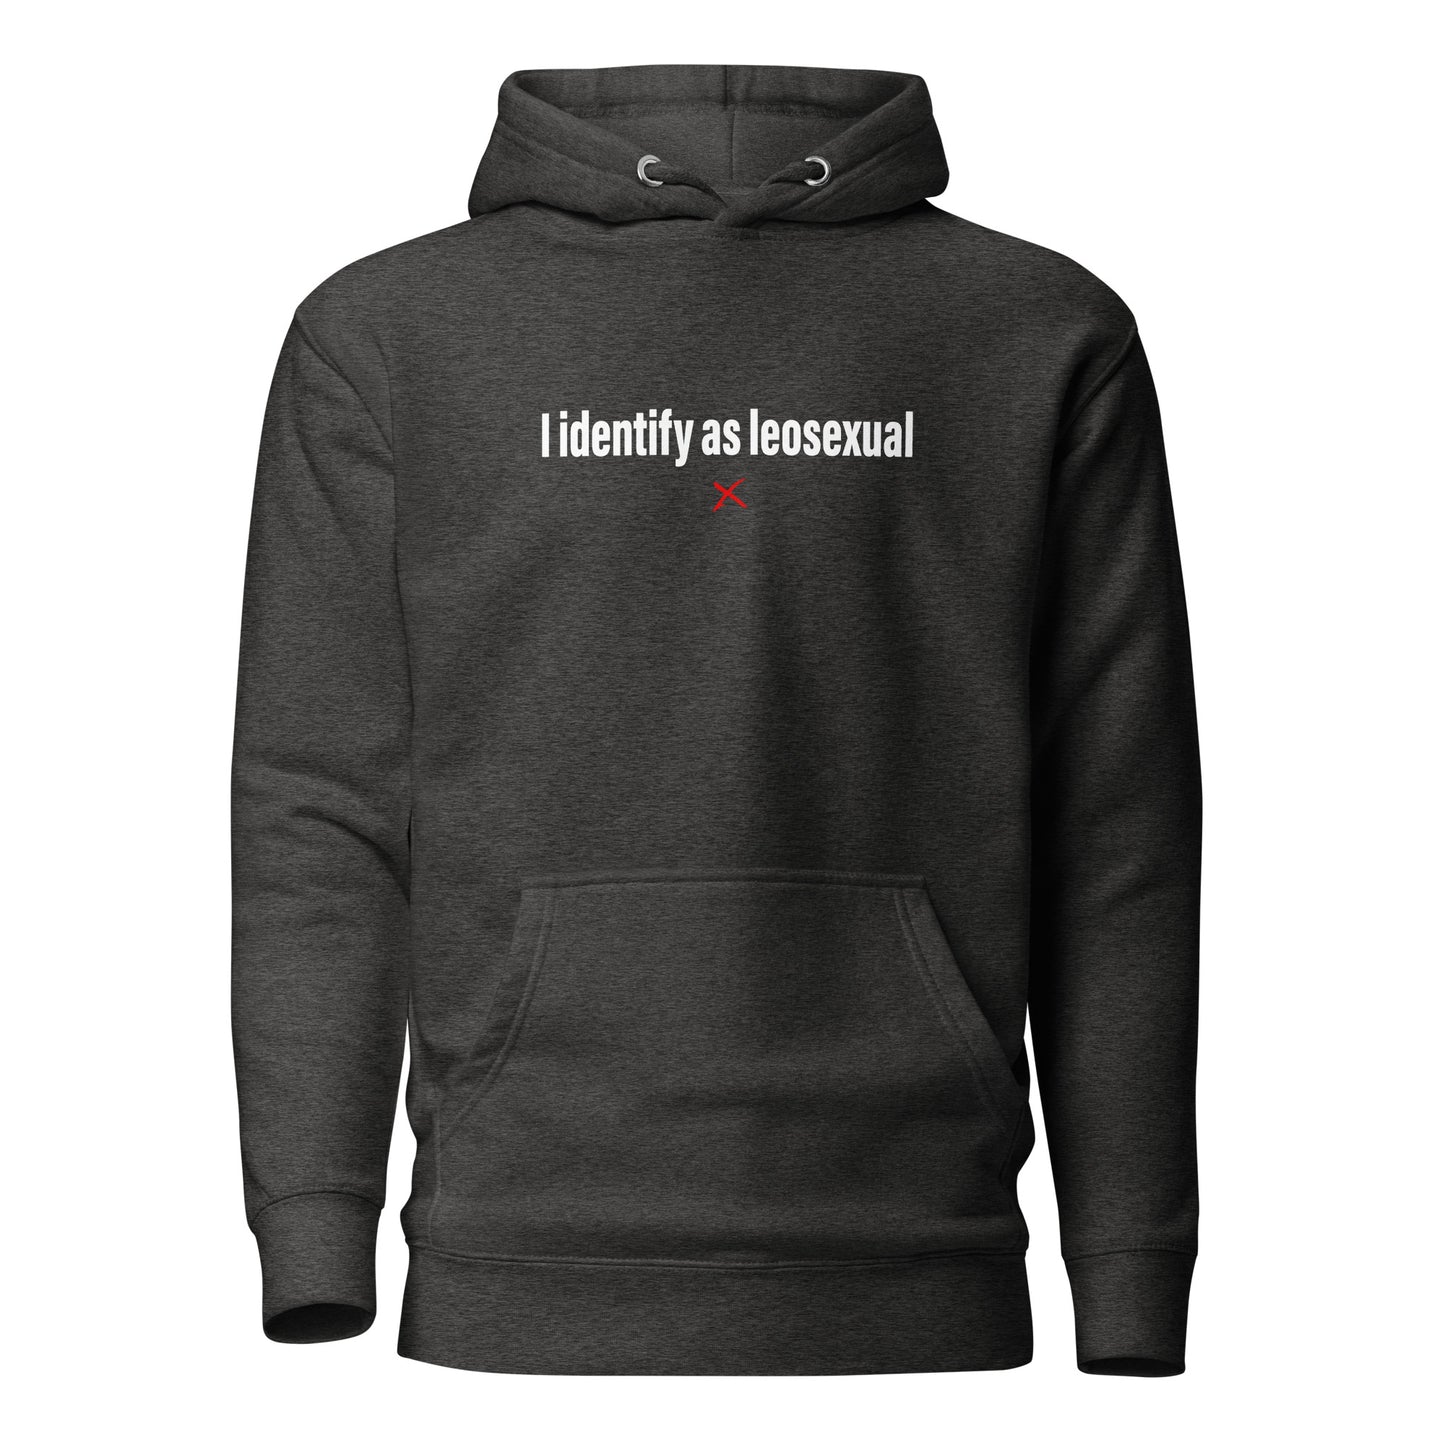 I identify as leosexual - Hoodie